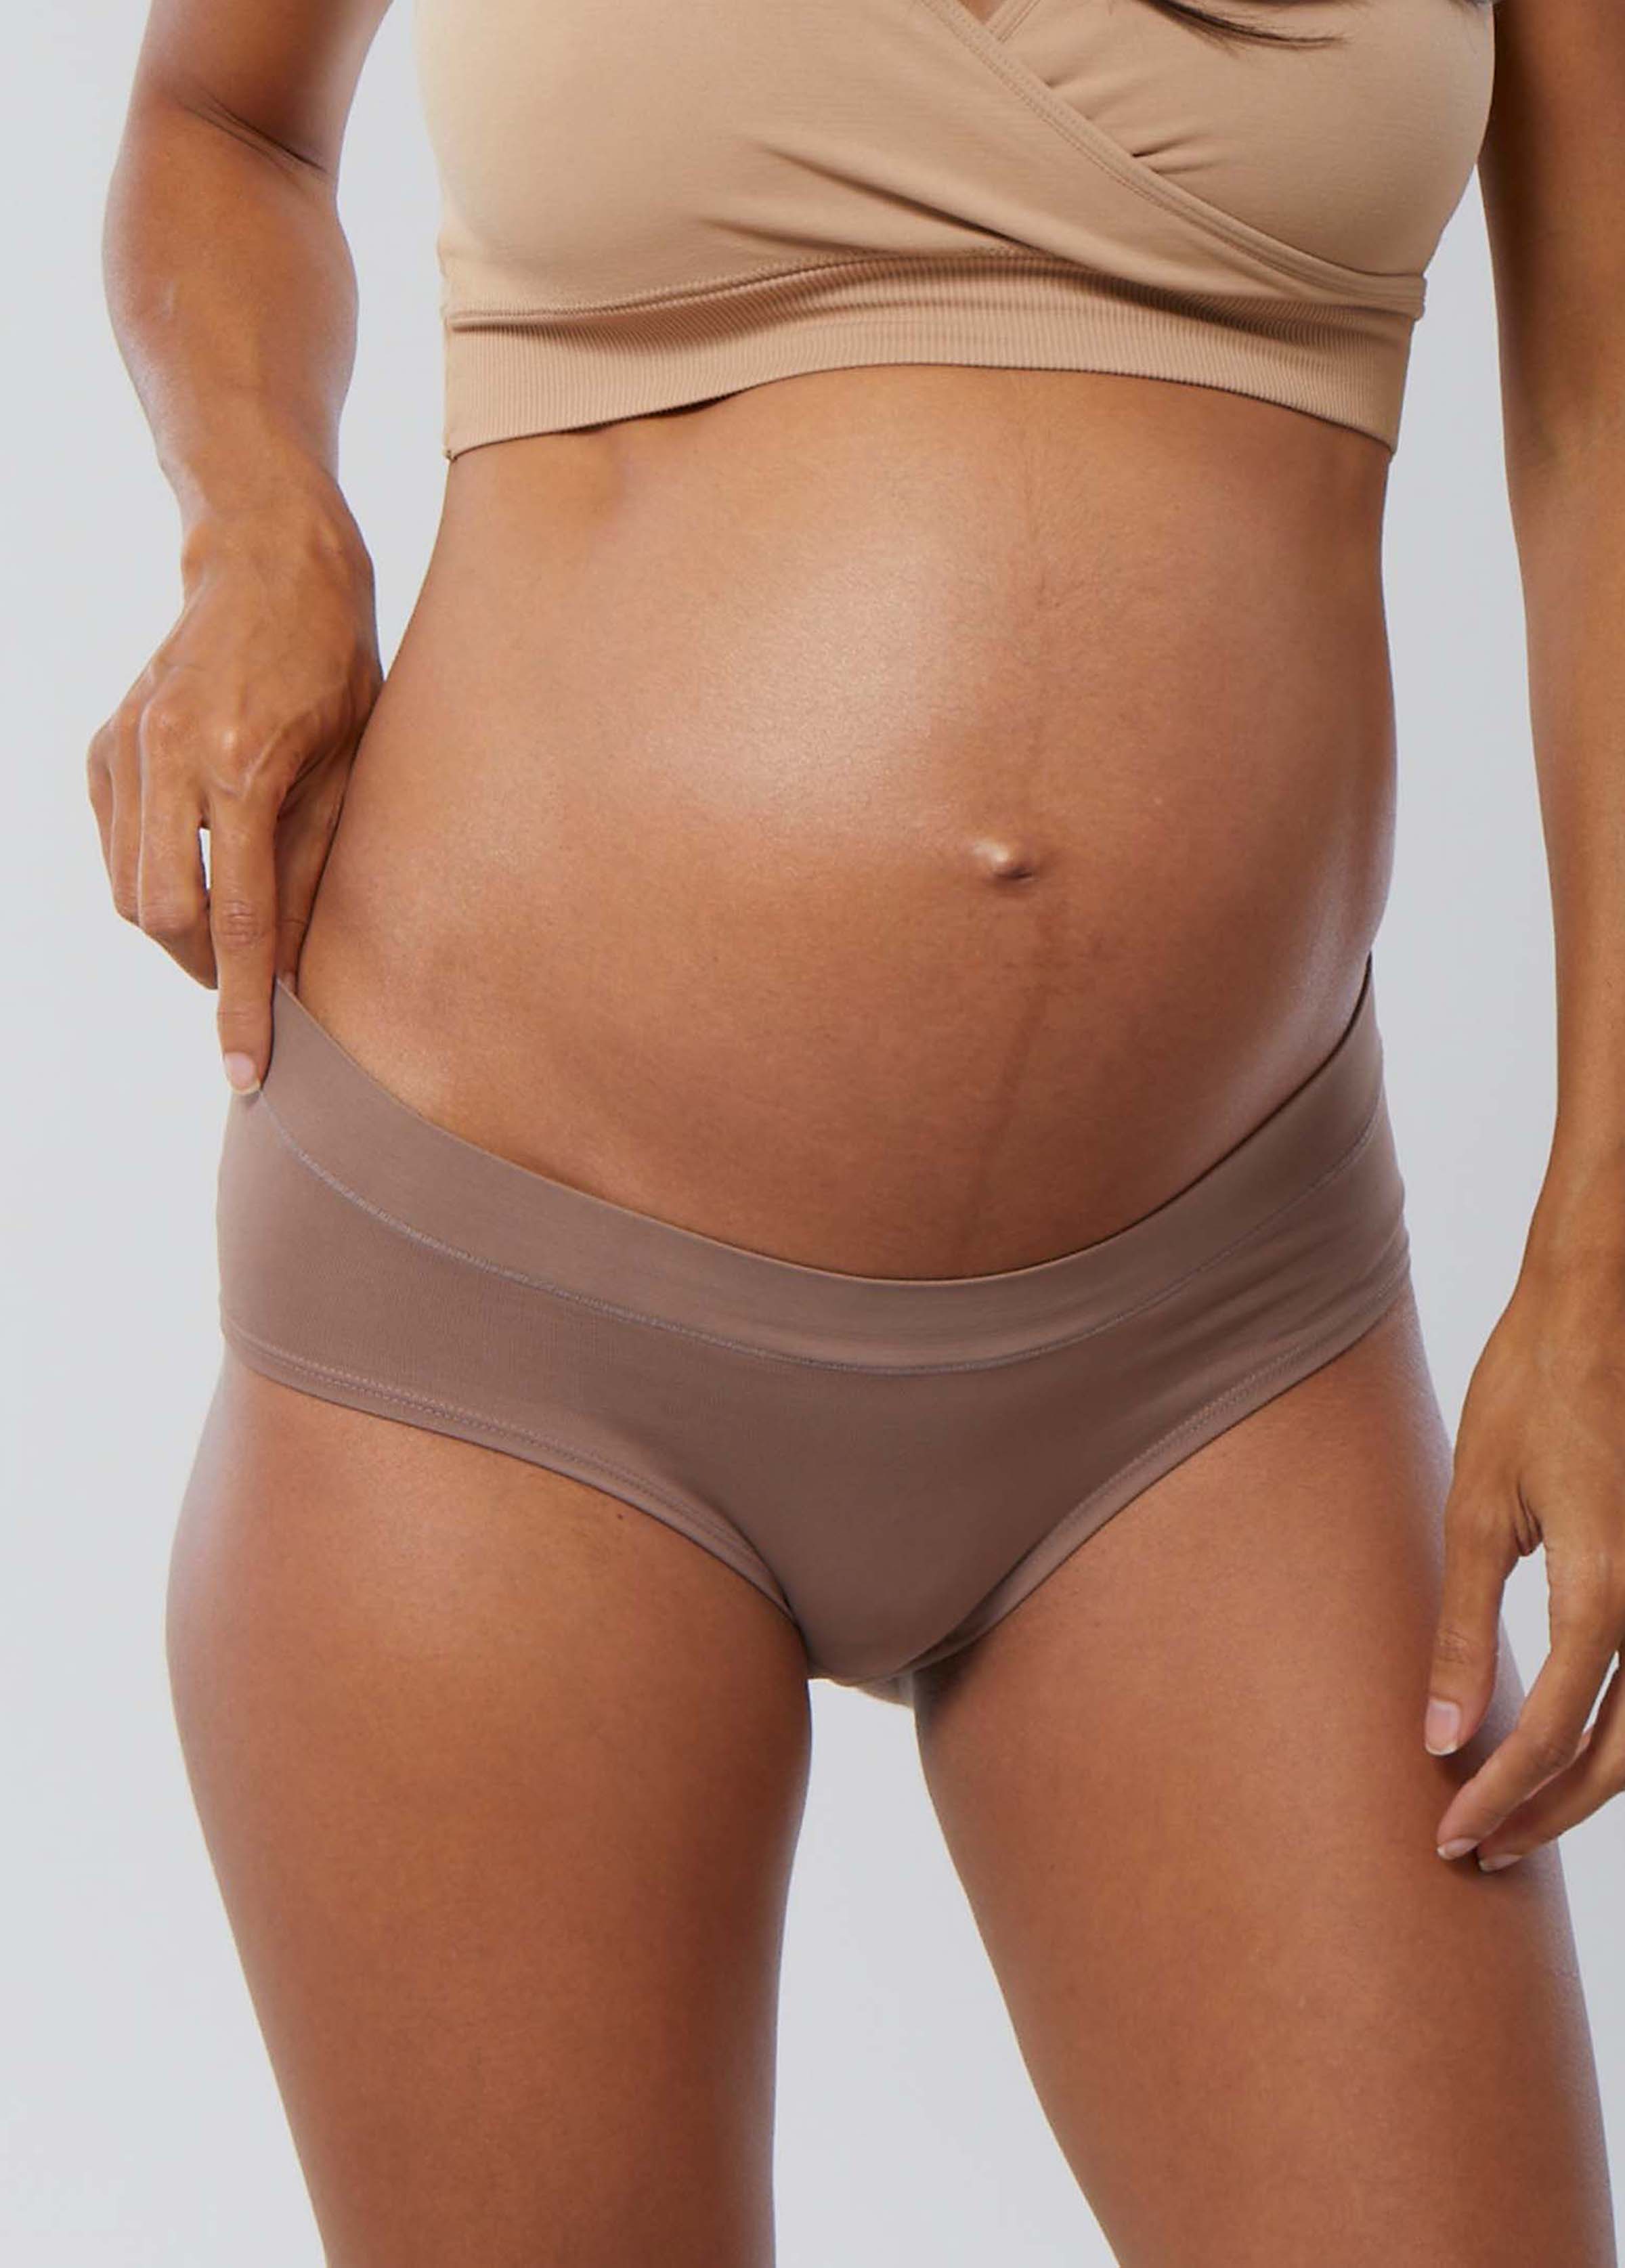 Maternity Underwear 3-Pack - Seamless, Cooling, Moisture-Wicking